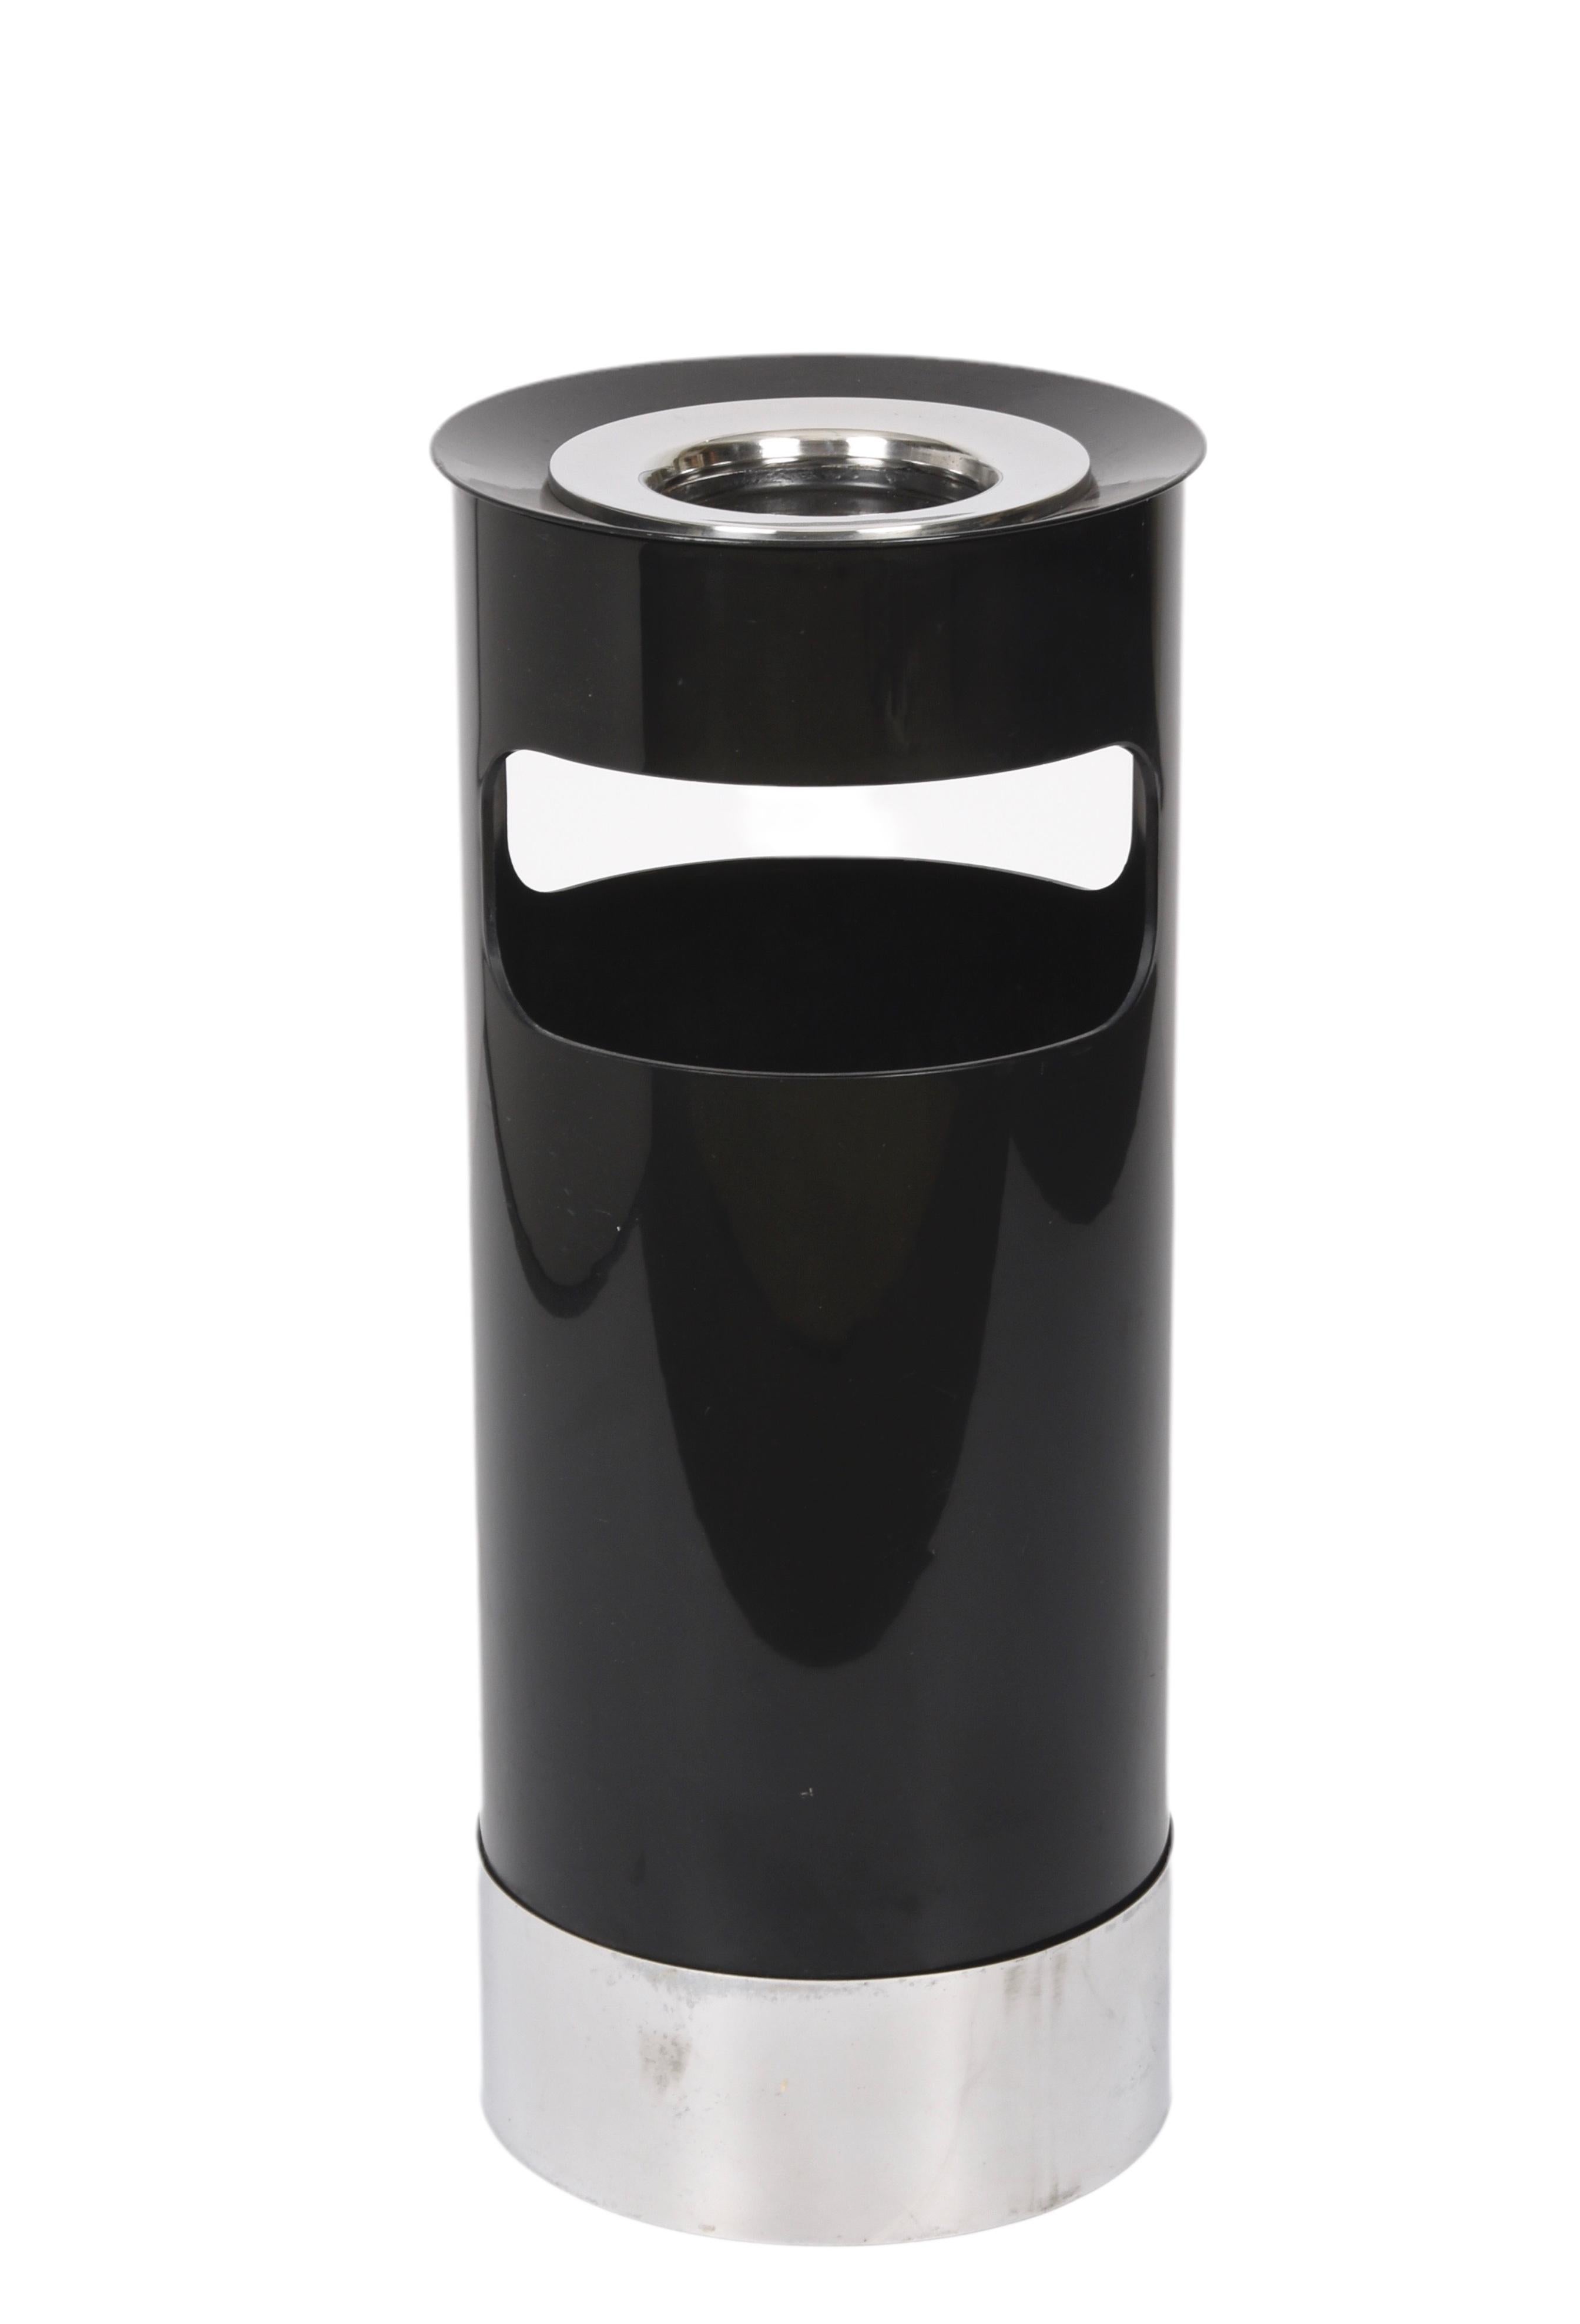 Gino Colombini Midcentury Black Umbrella Stands or Ashtray for Kartell, 1970 For Sale 3